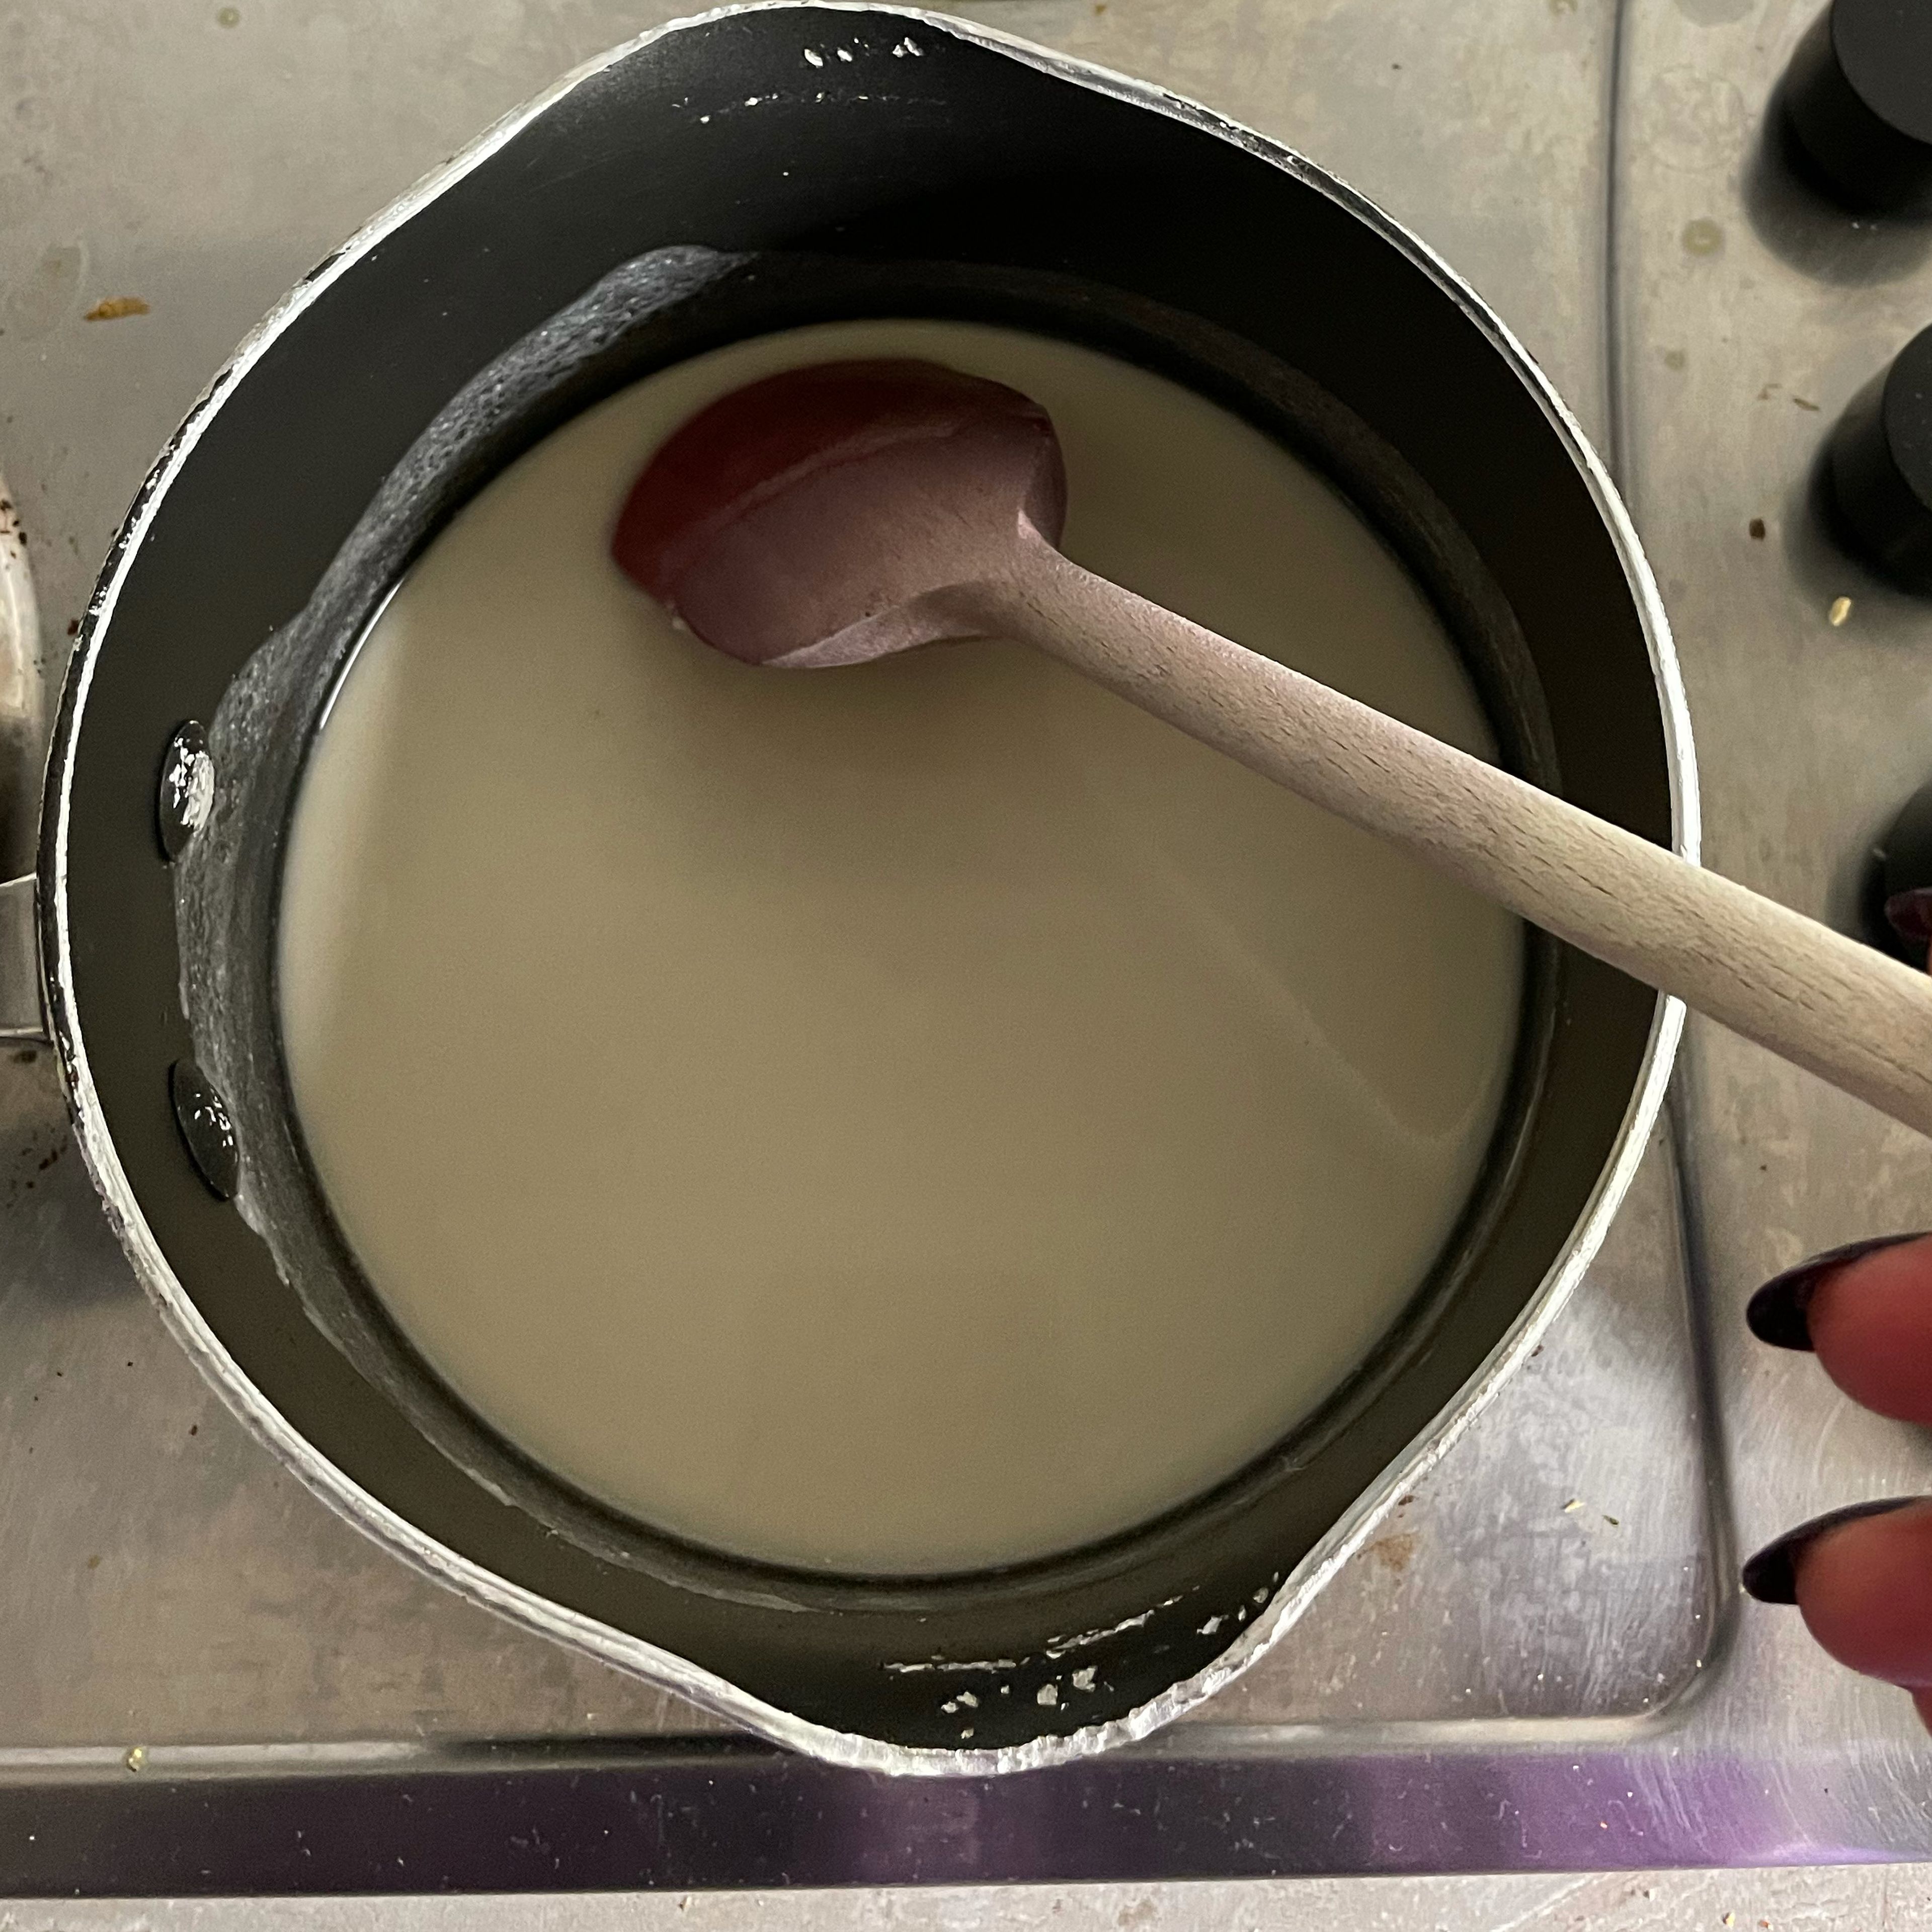 Add a little tap water to powder and stir still you have smooth liquid paste . Boil water and add to mixture under a hot stove and stir still you get a cream thick paste.